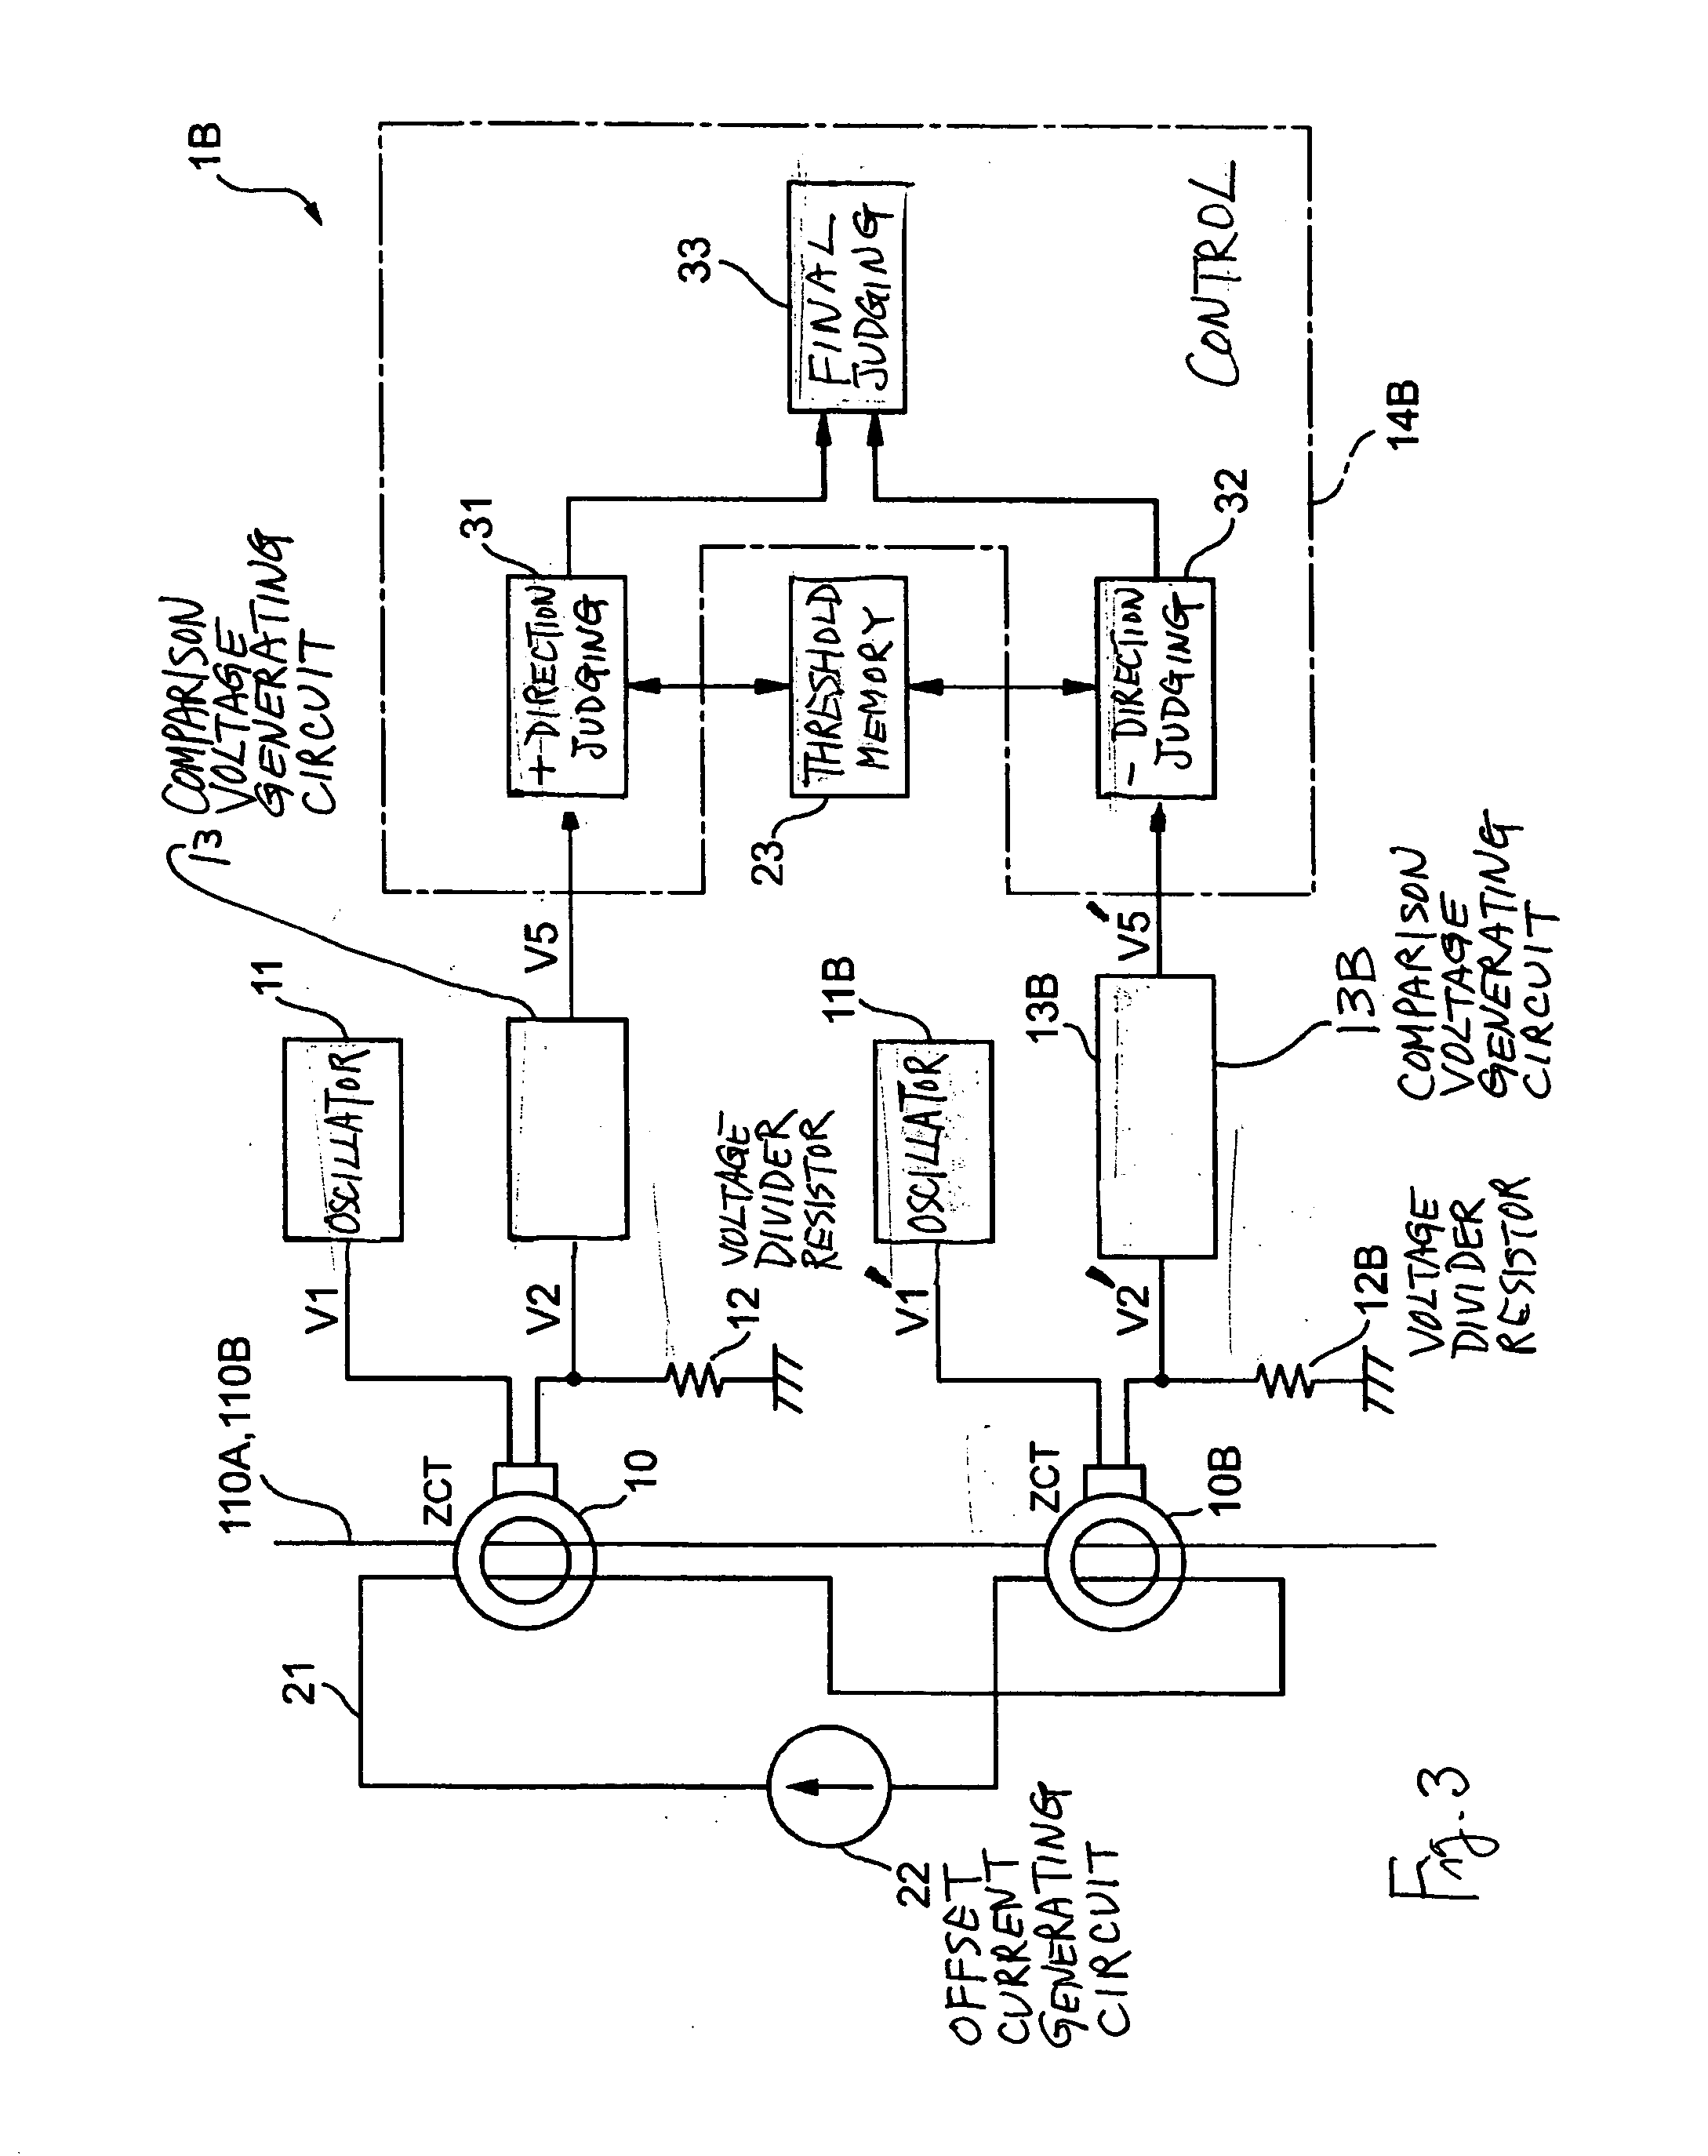 Direct current detection circuit